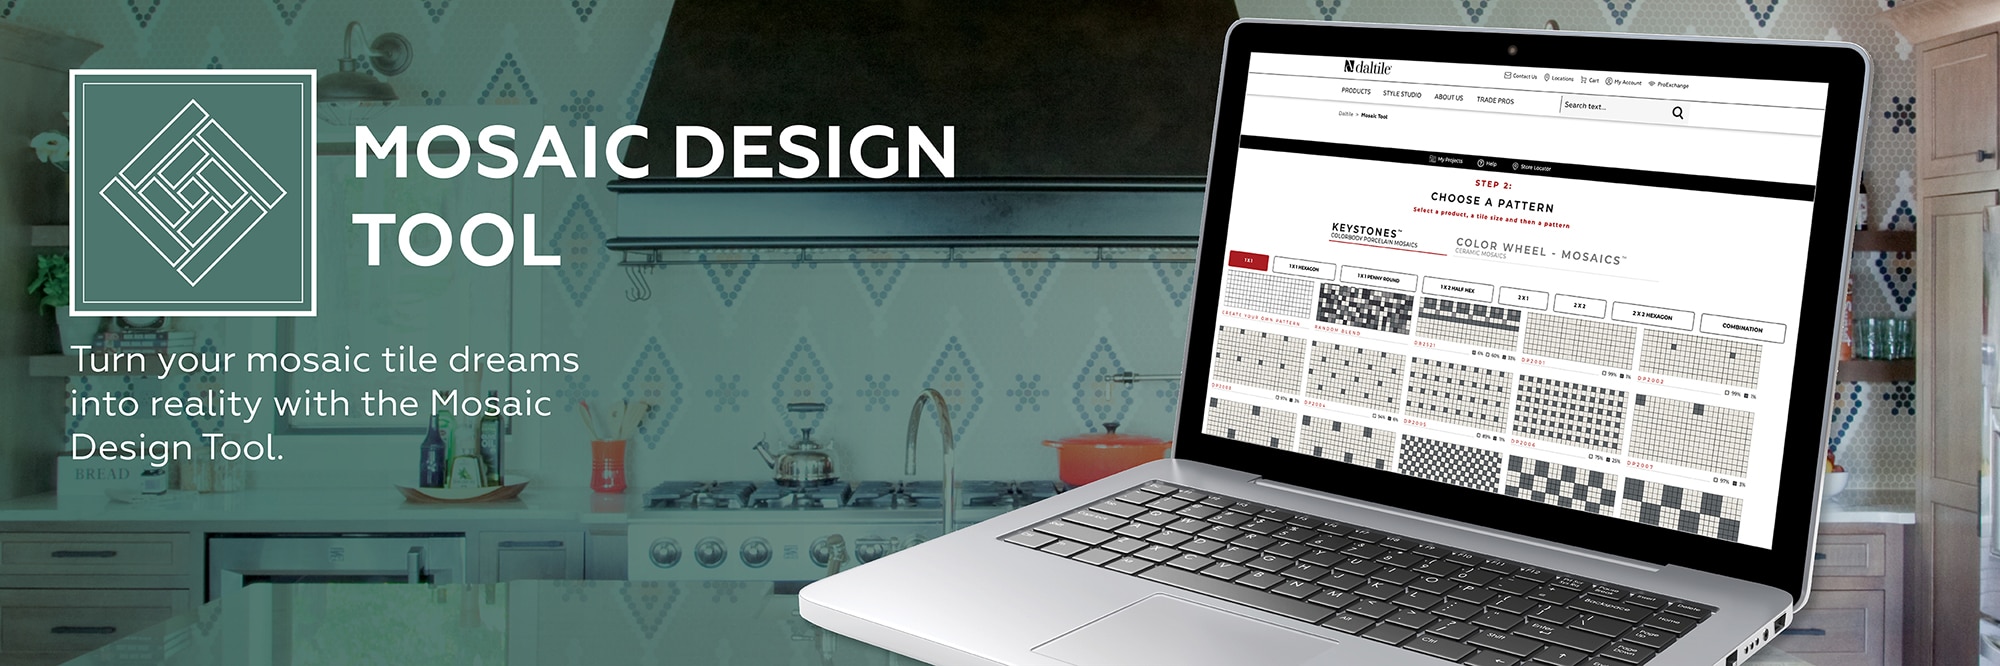 Turn your mosaic tile dreams into reality with the Mosaic Design Tool.